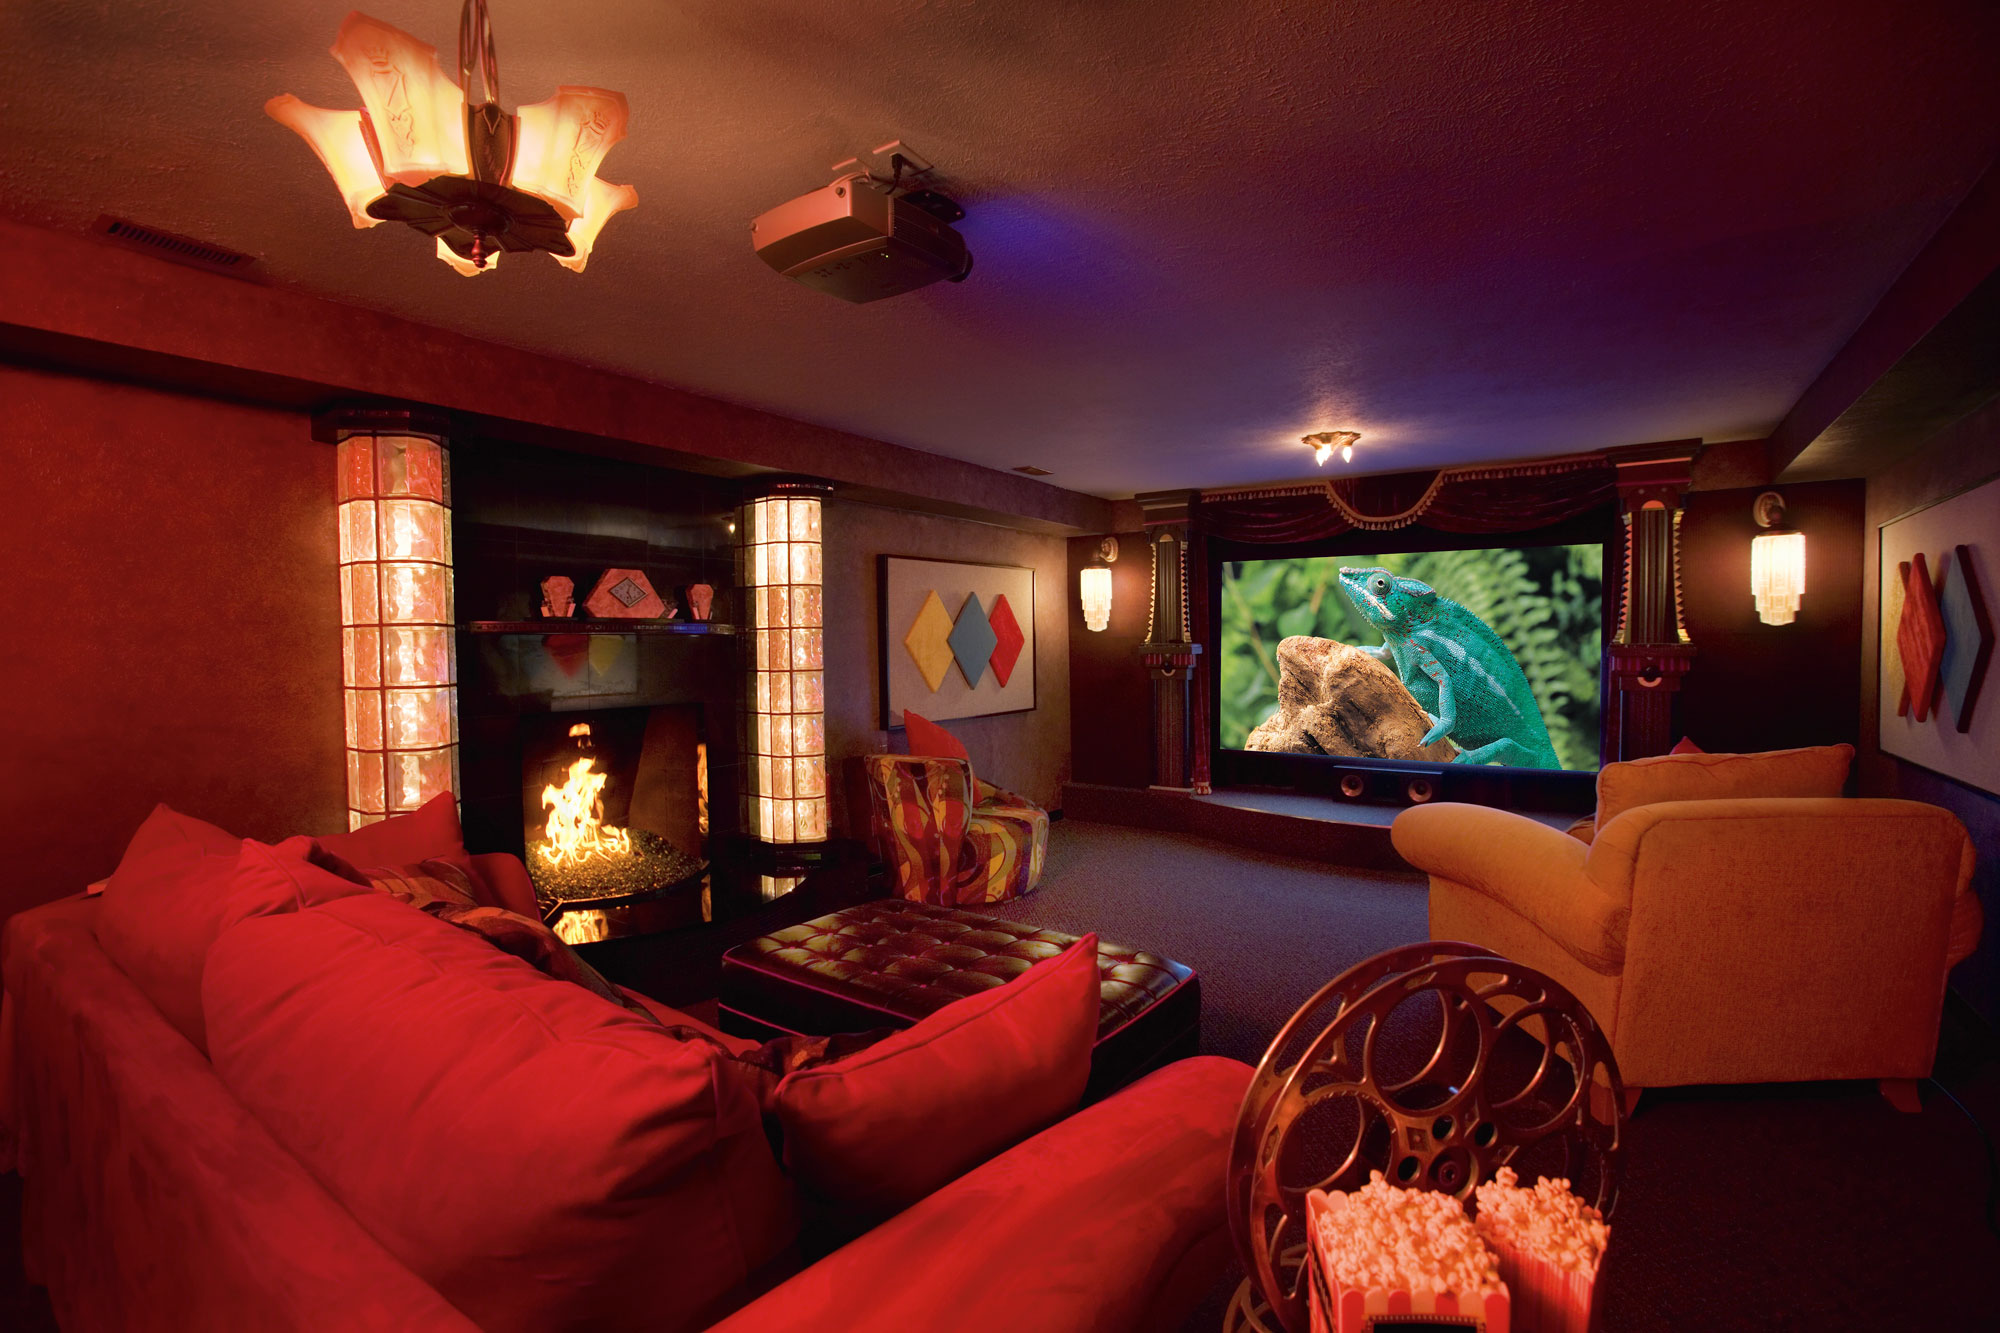 Home Theater Systems from Audio Video Systems